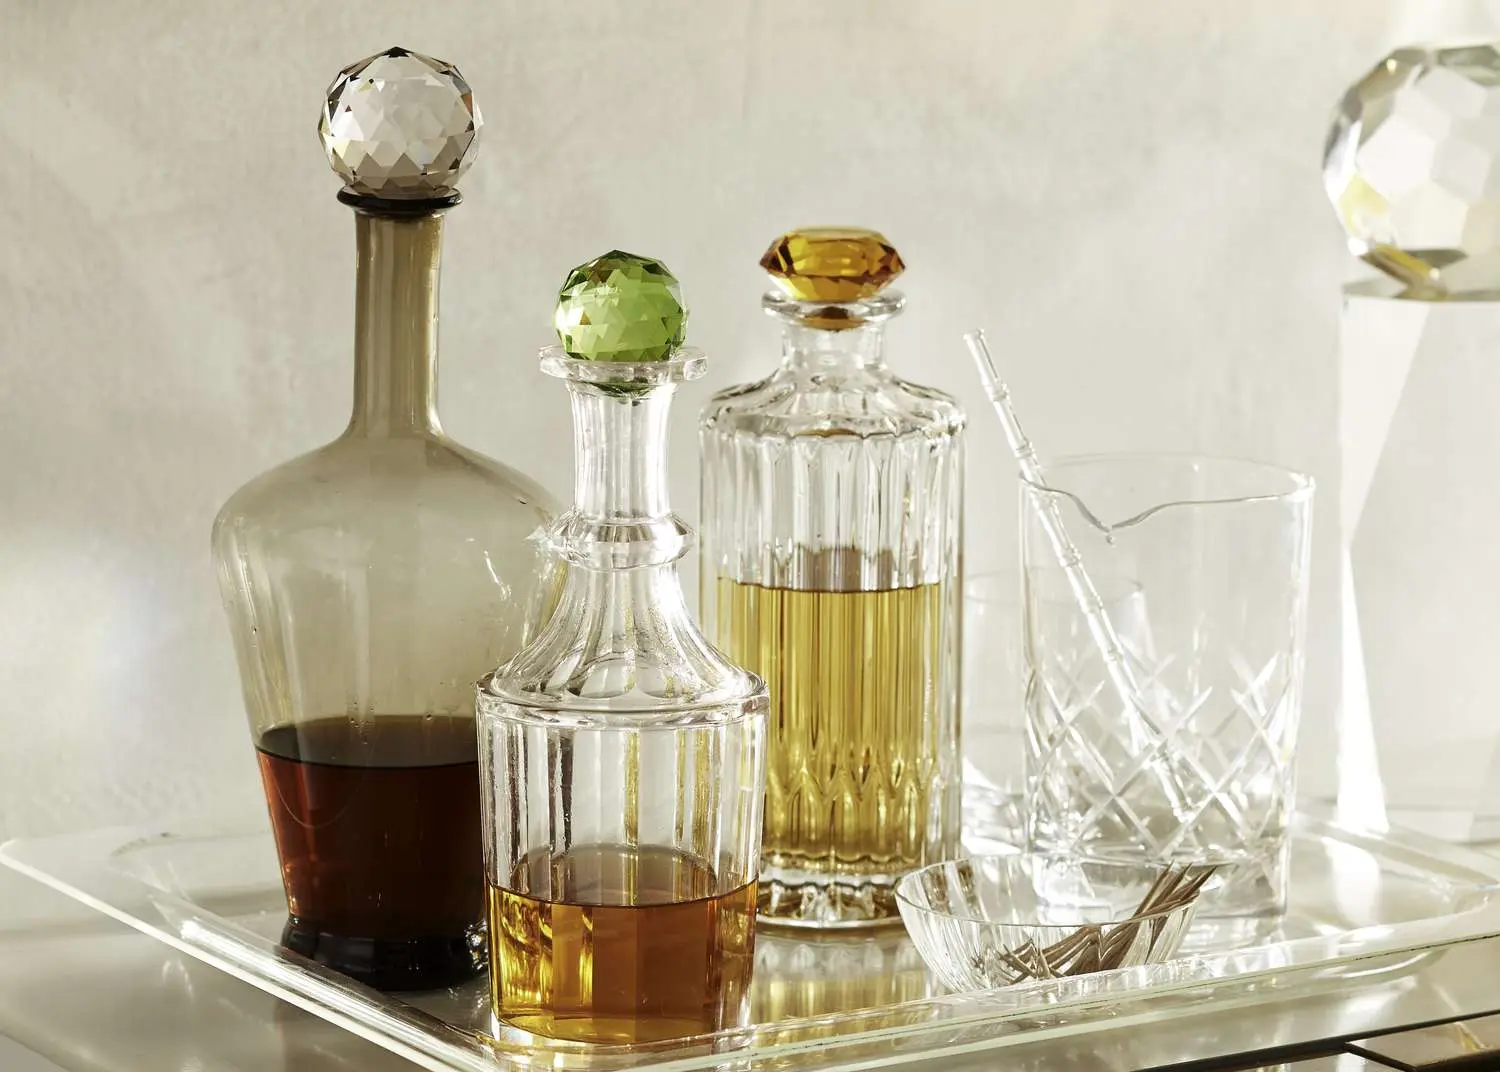 smoked glass decanter - What alcohol do you put in a glass decanter